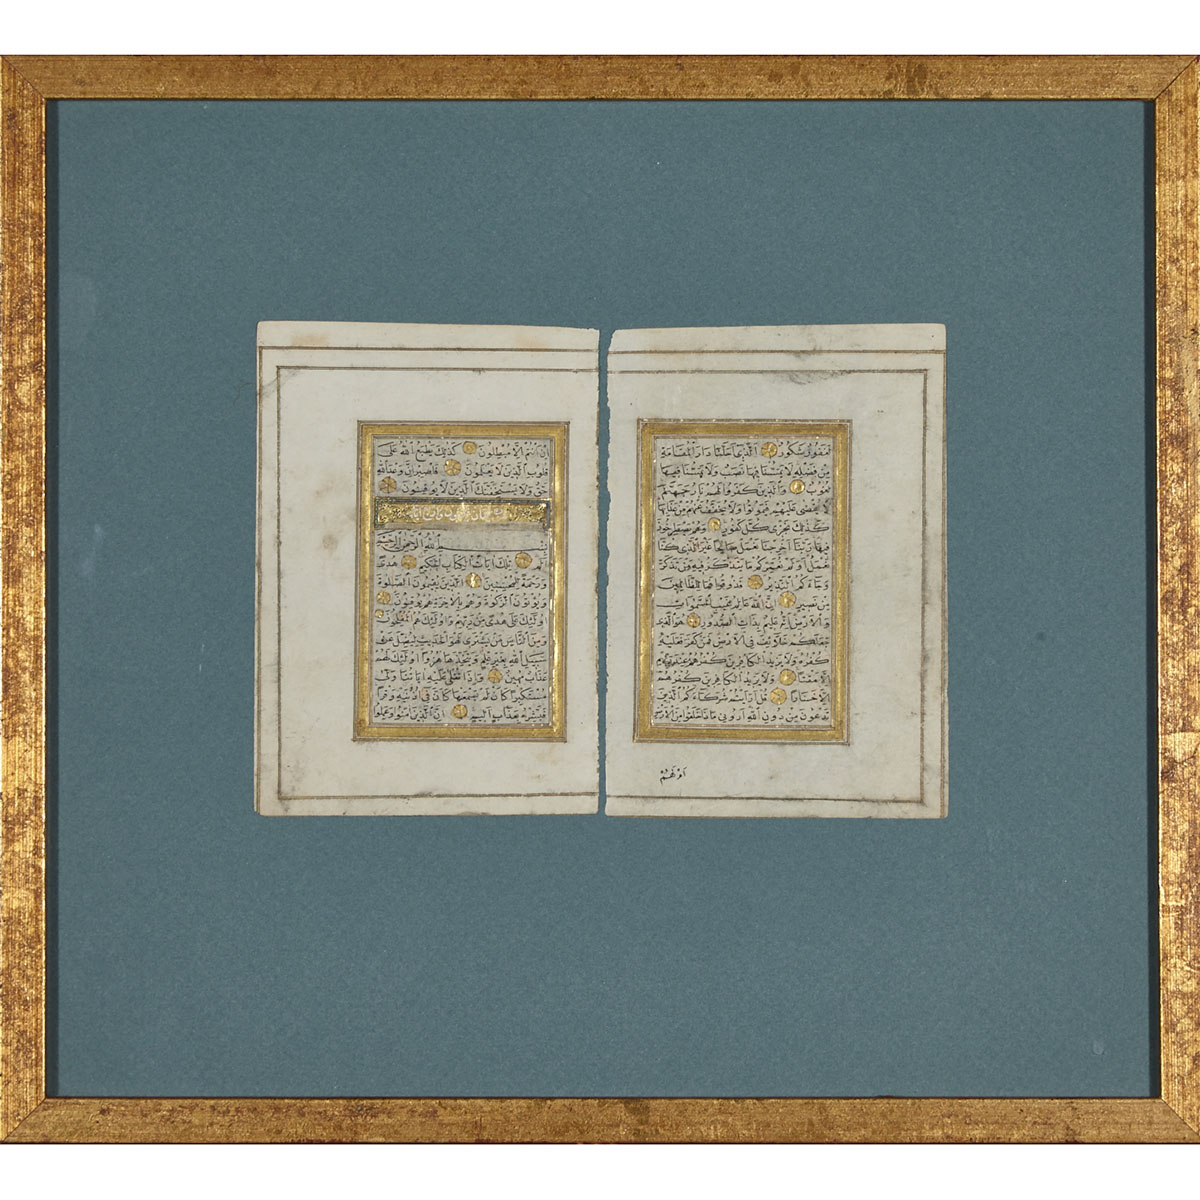 Framed Qur’an Pages, Early 19th Century